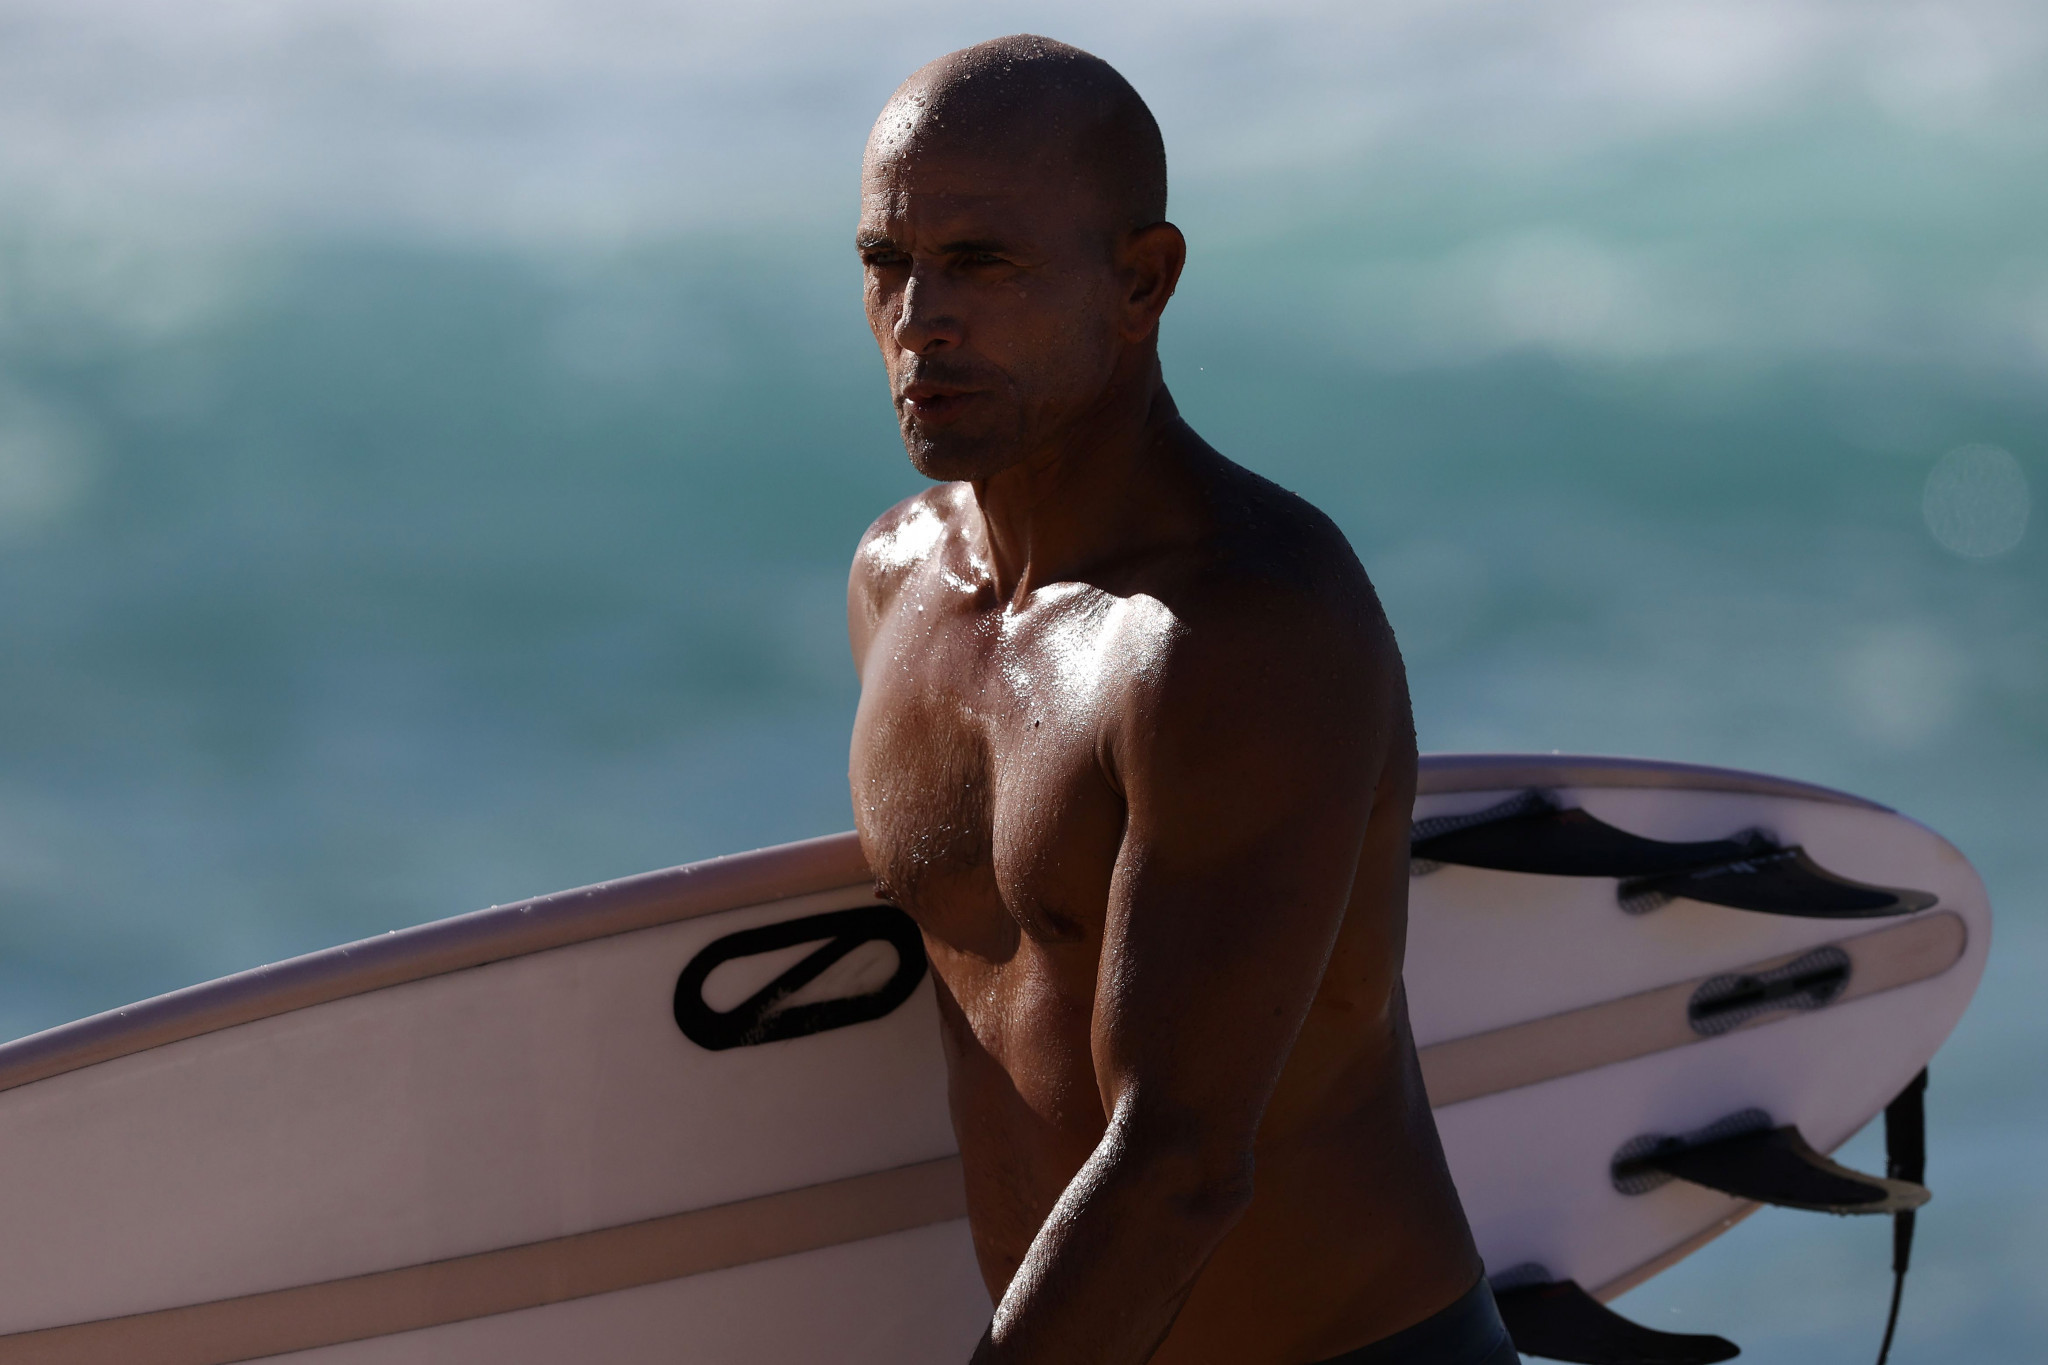 Kelly Slater has been criticised for his views on the COVID-19 vaccine ©Getty Images